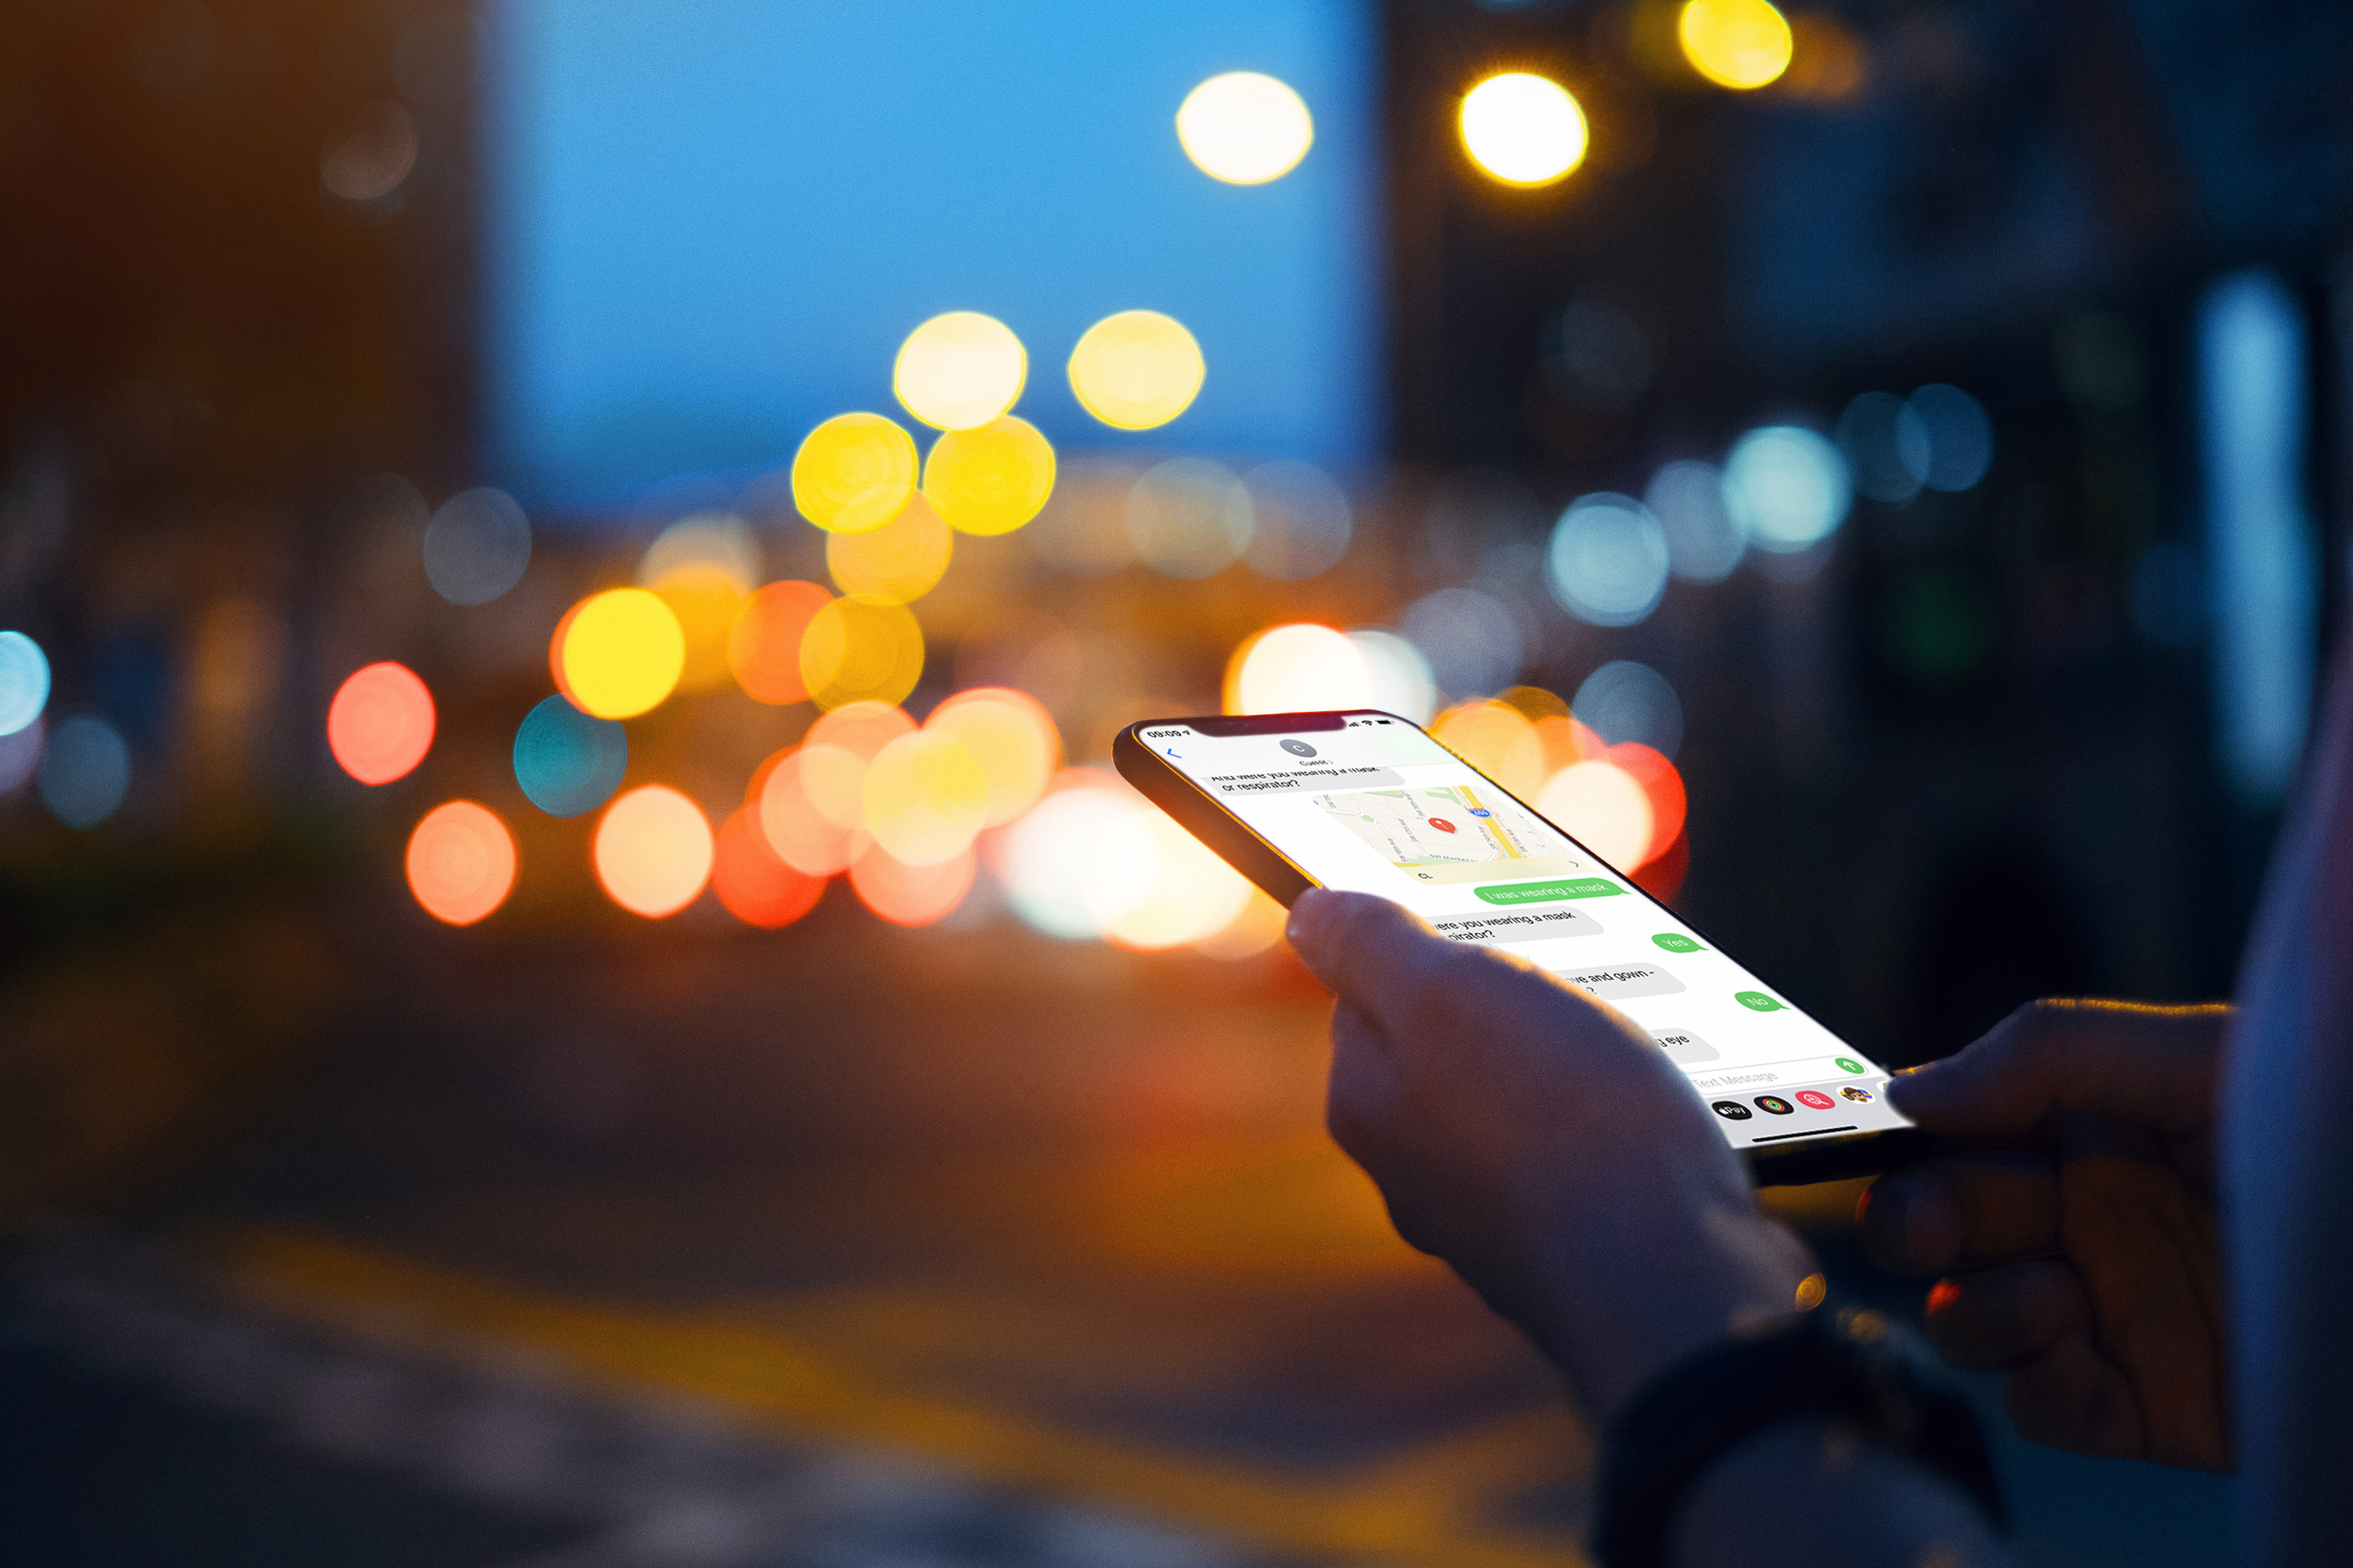 A person holding smartphone with various chart, blurred city lights in the background